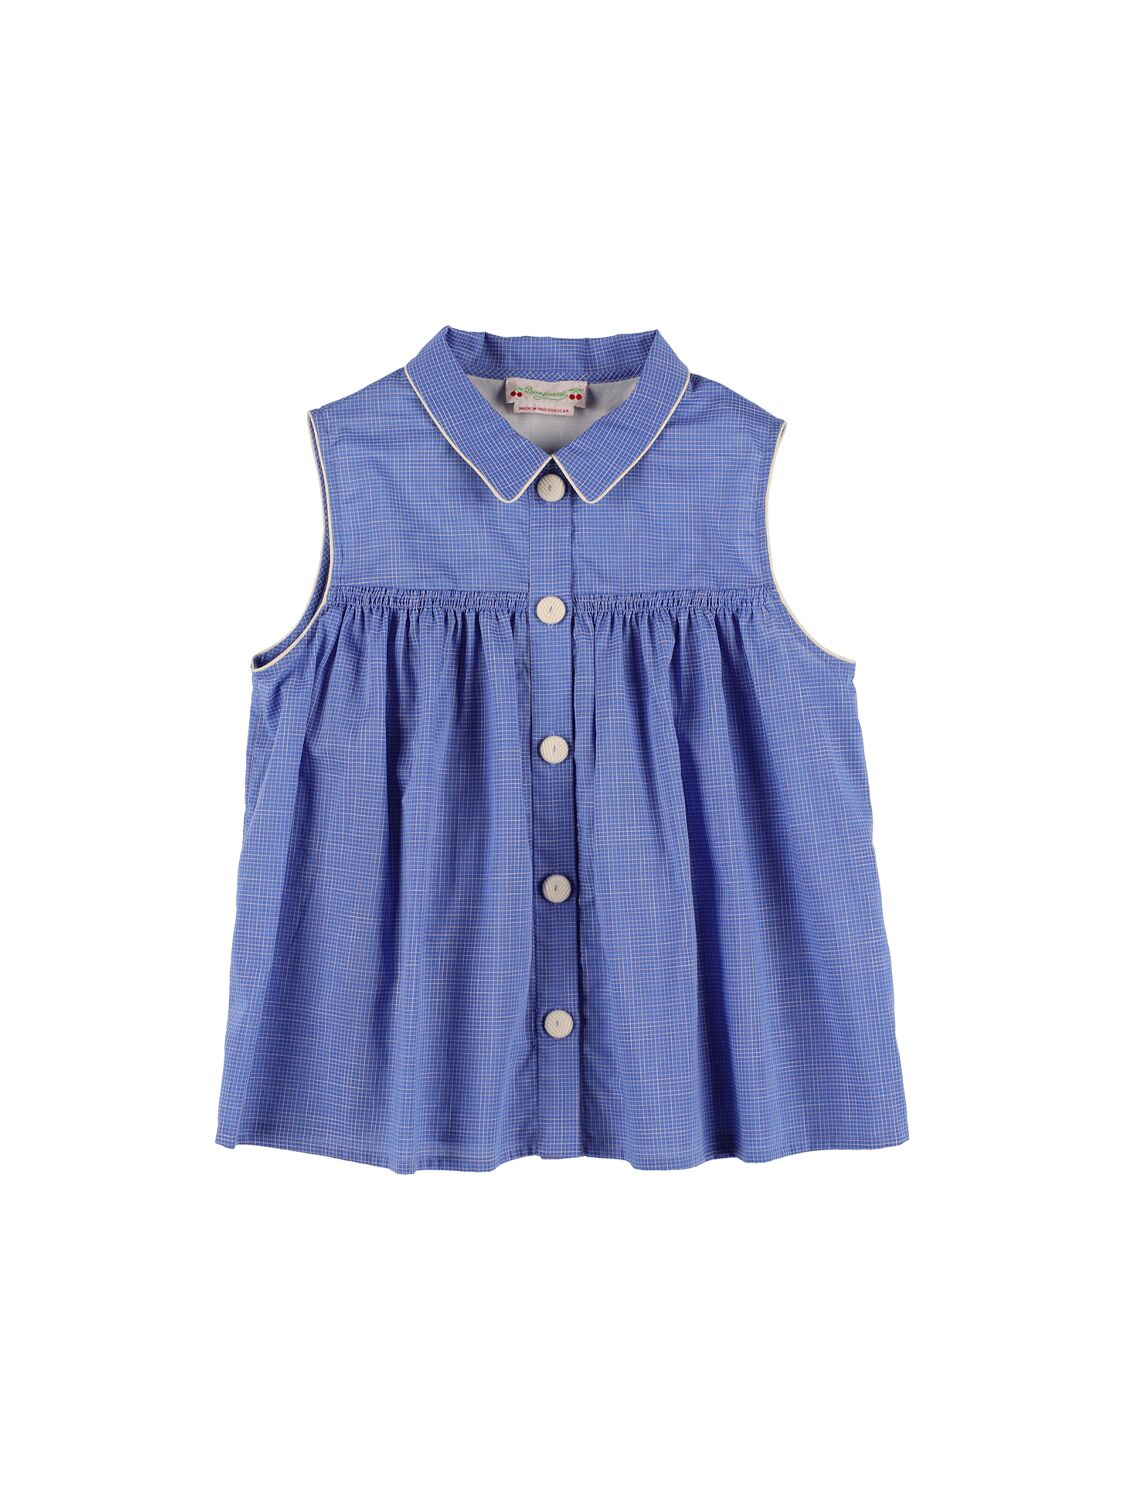 Image of Cotton Chambray Top